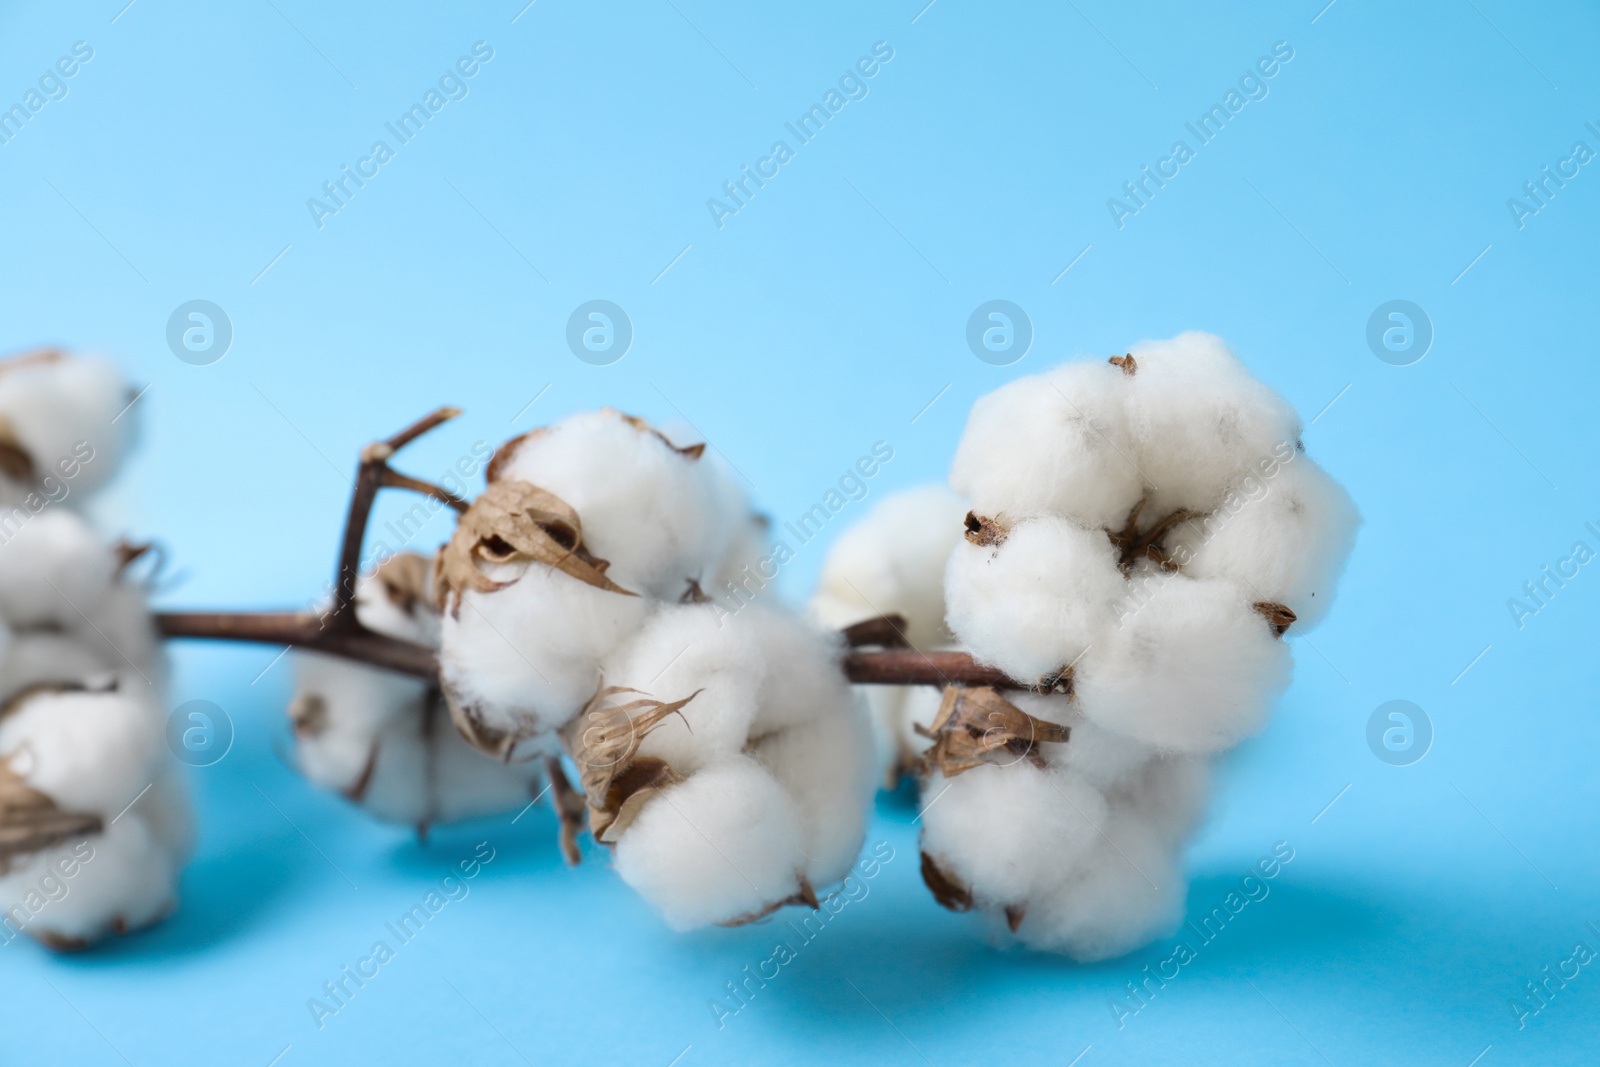 Photo of Fluffy cotton flowers on light blue background, closeup